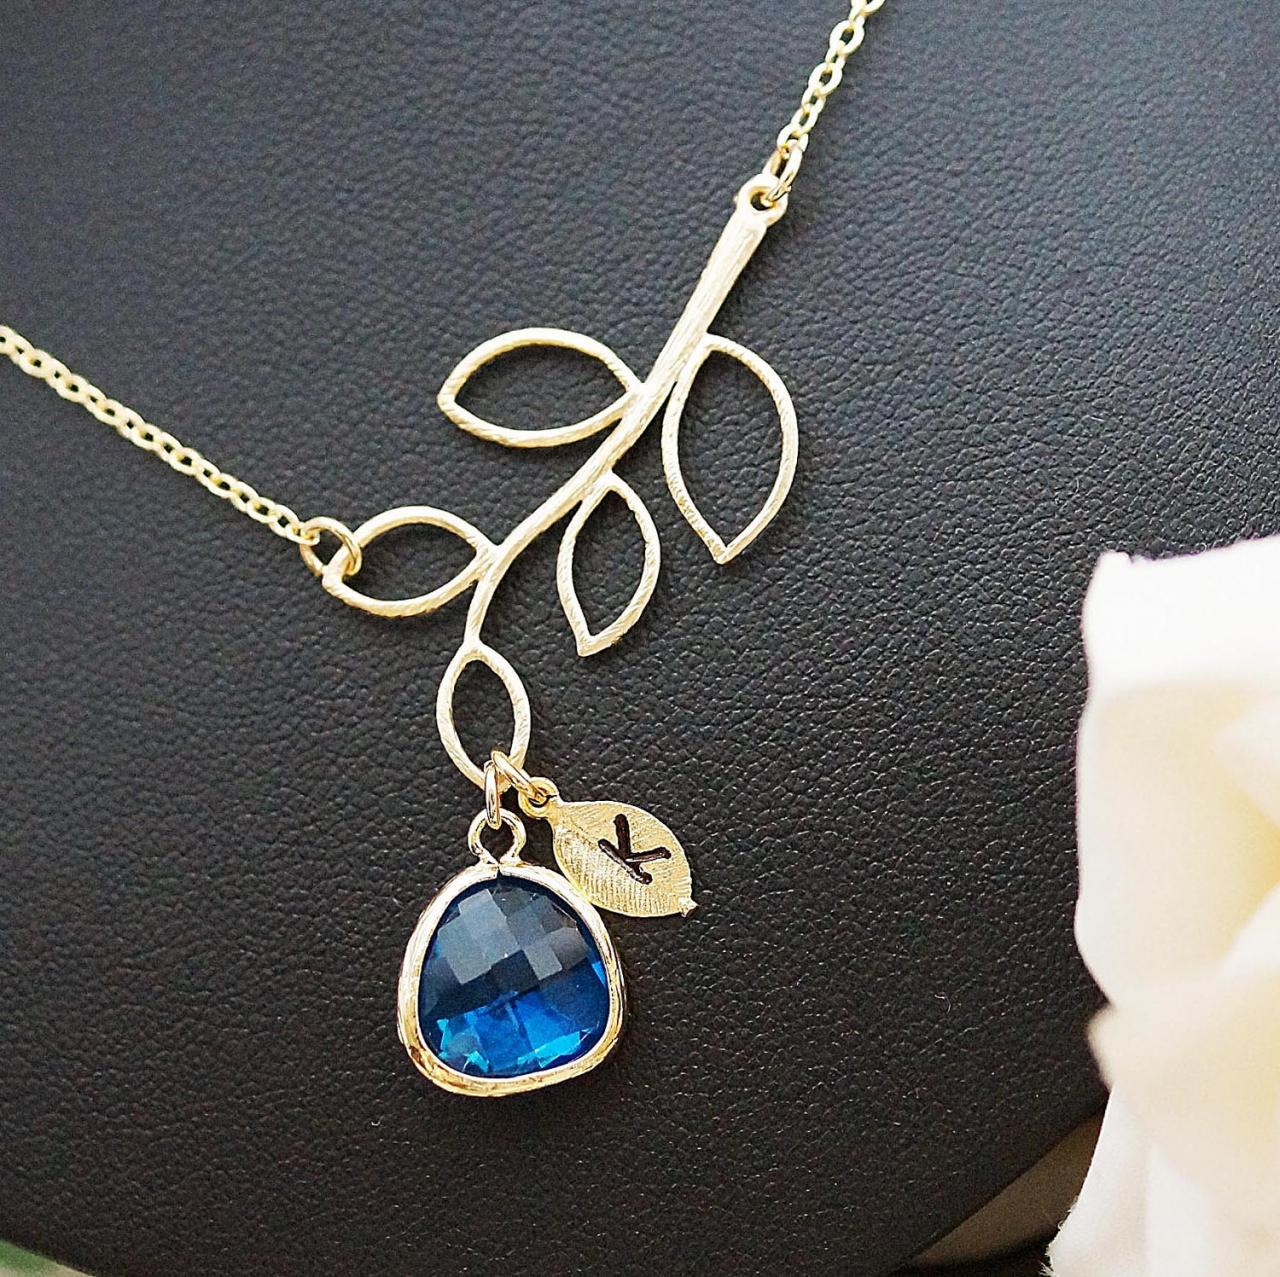 Personalized Necklace Bridesmaid Gift Simple Leaf With Capri Blue Glass Drop And Initial Leaf Charm Necklace , For Her. Gift For Her